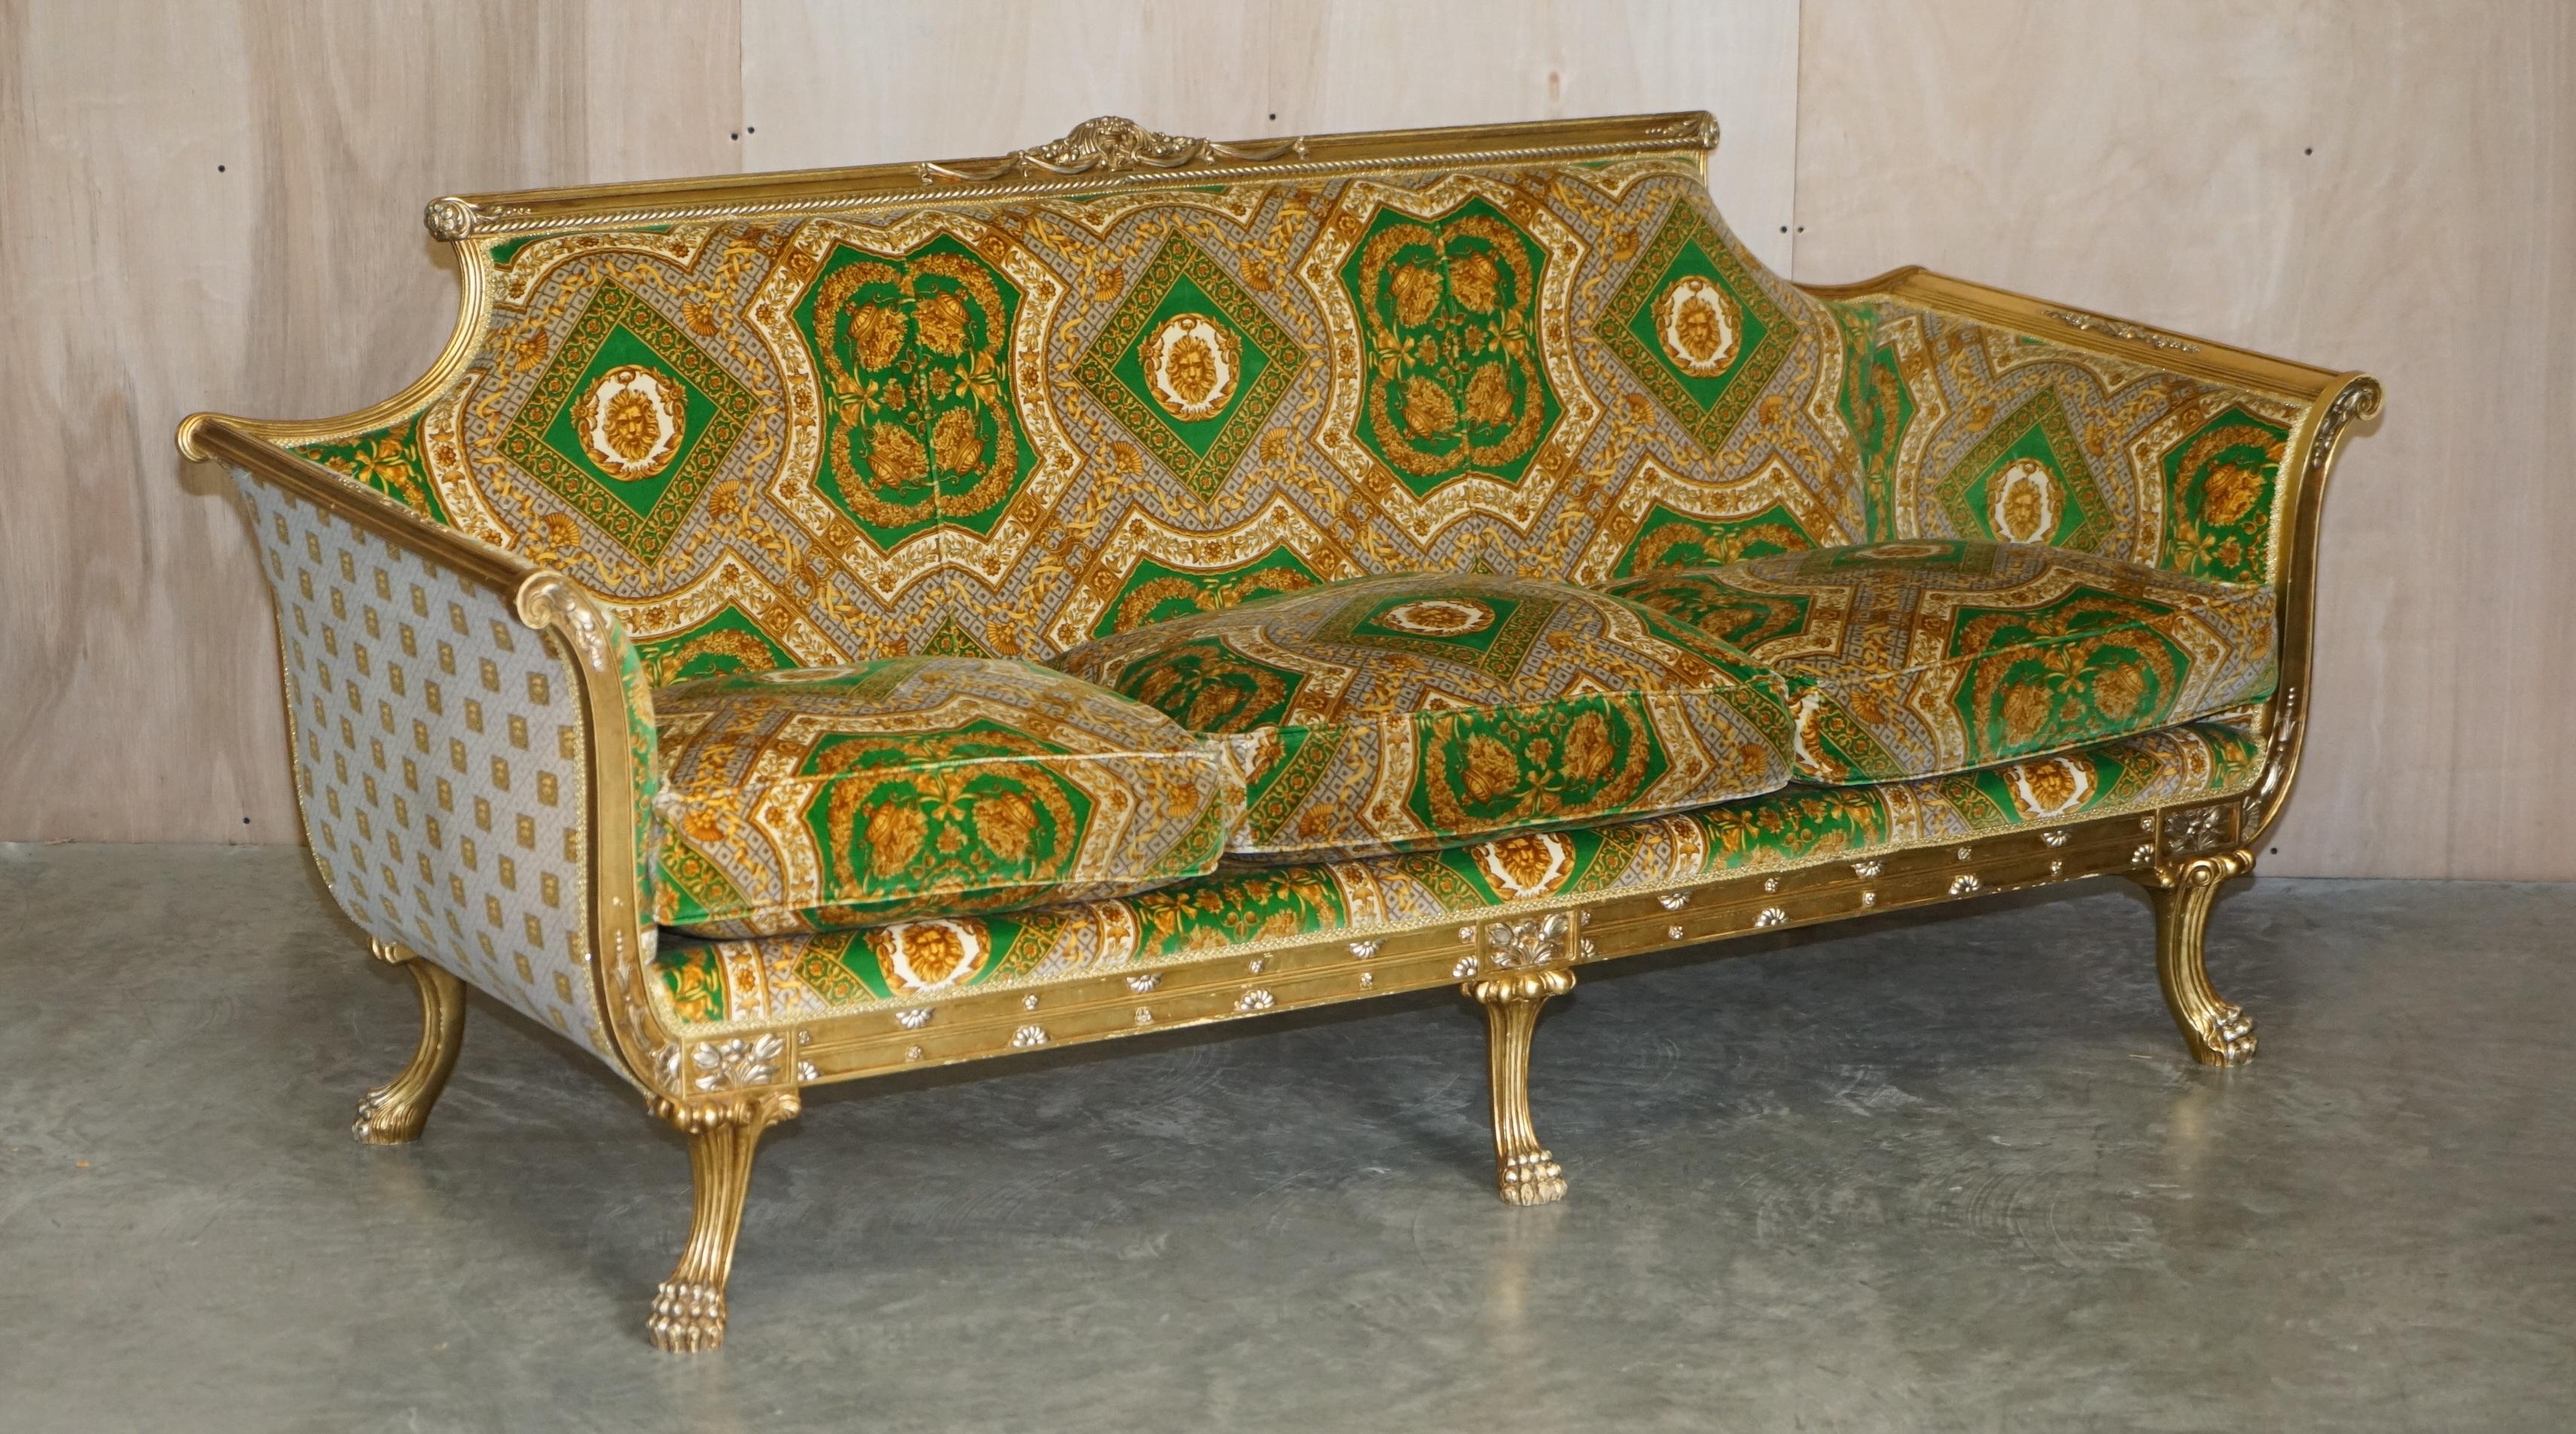 We are delighted to offer for sale this extremely well made, vintage Versace Upholstered Italian with silk velvet, Giltwood framed sofa and pair of armchairs suite.

A truly stunning and exquisitely crafted suite, the frames are hand carved oak,